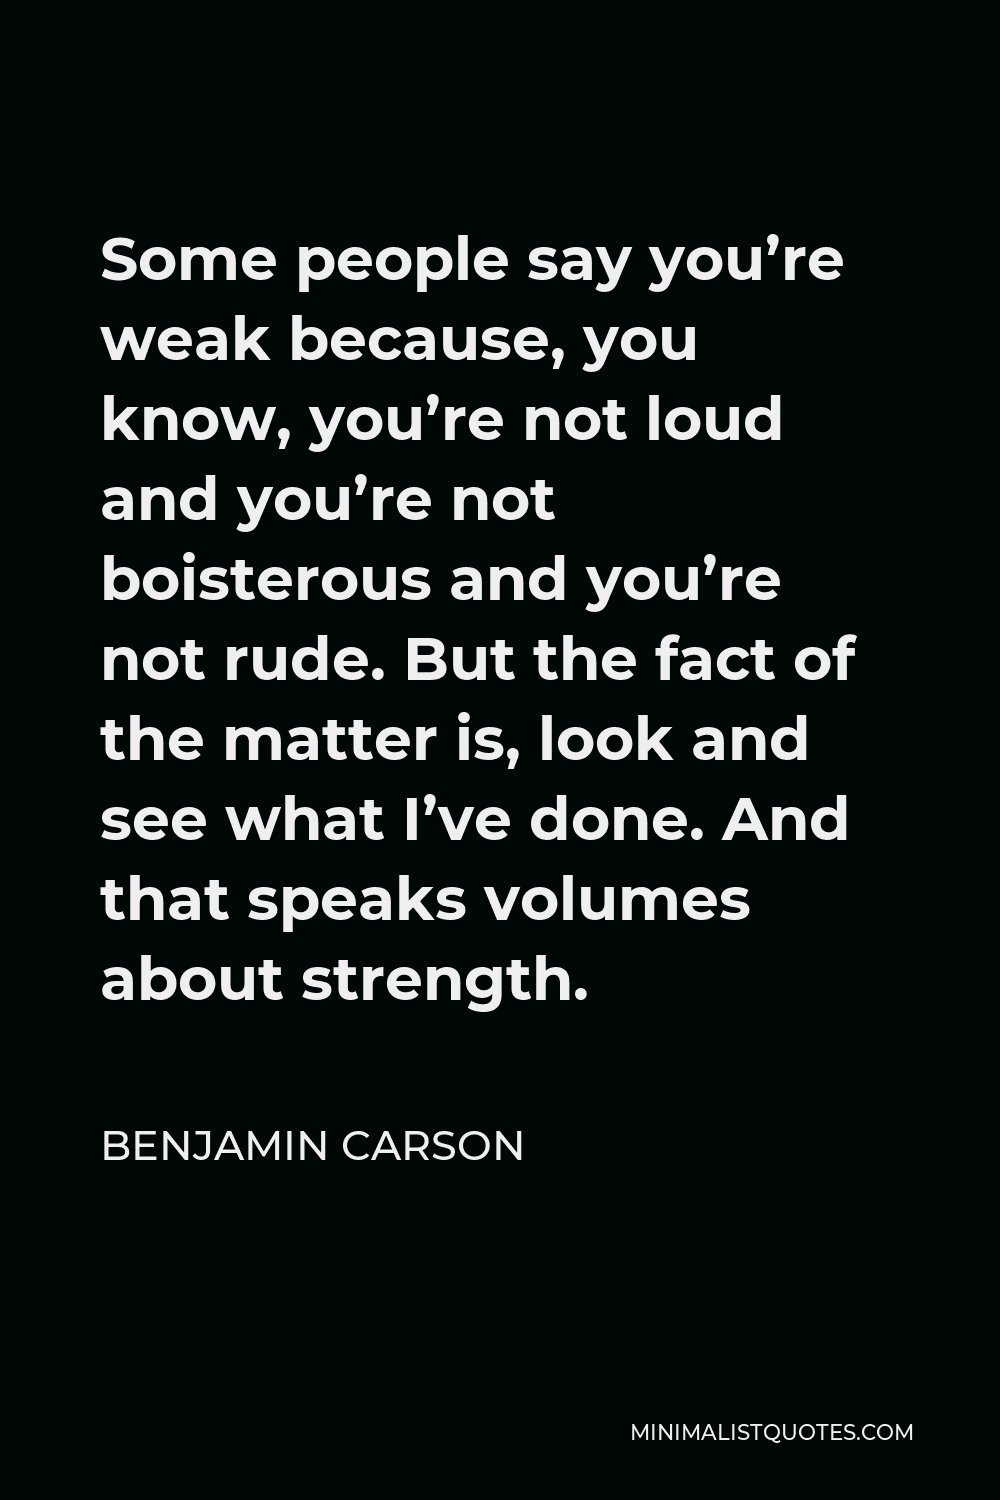 Benjamin Carson Quote - Some people say you’re weak because, you know, you’re not loud and you’re not boisterous and you’re not rude. But the fact of the matter is, look and see what I’ve done. And that speaks volumes about strength.